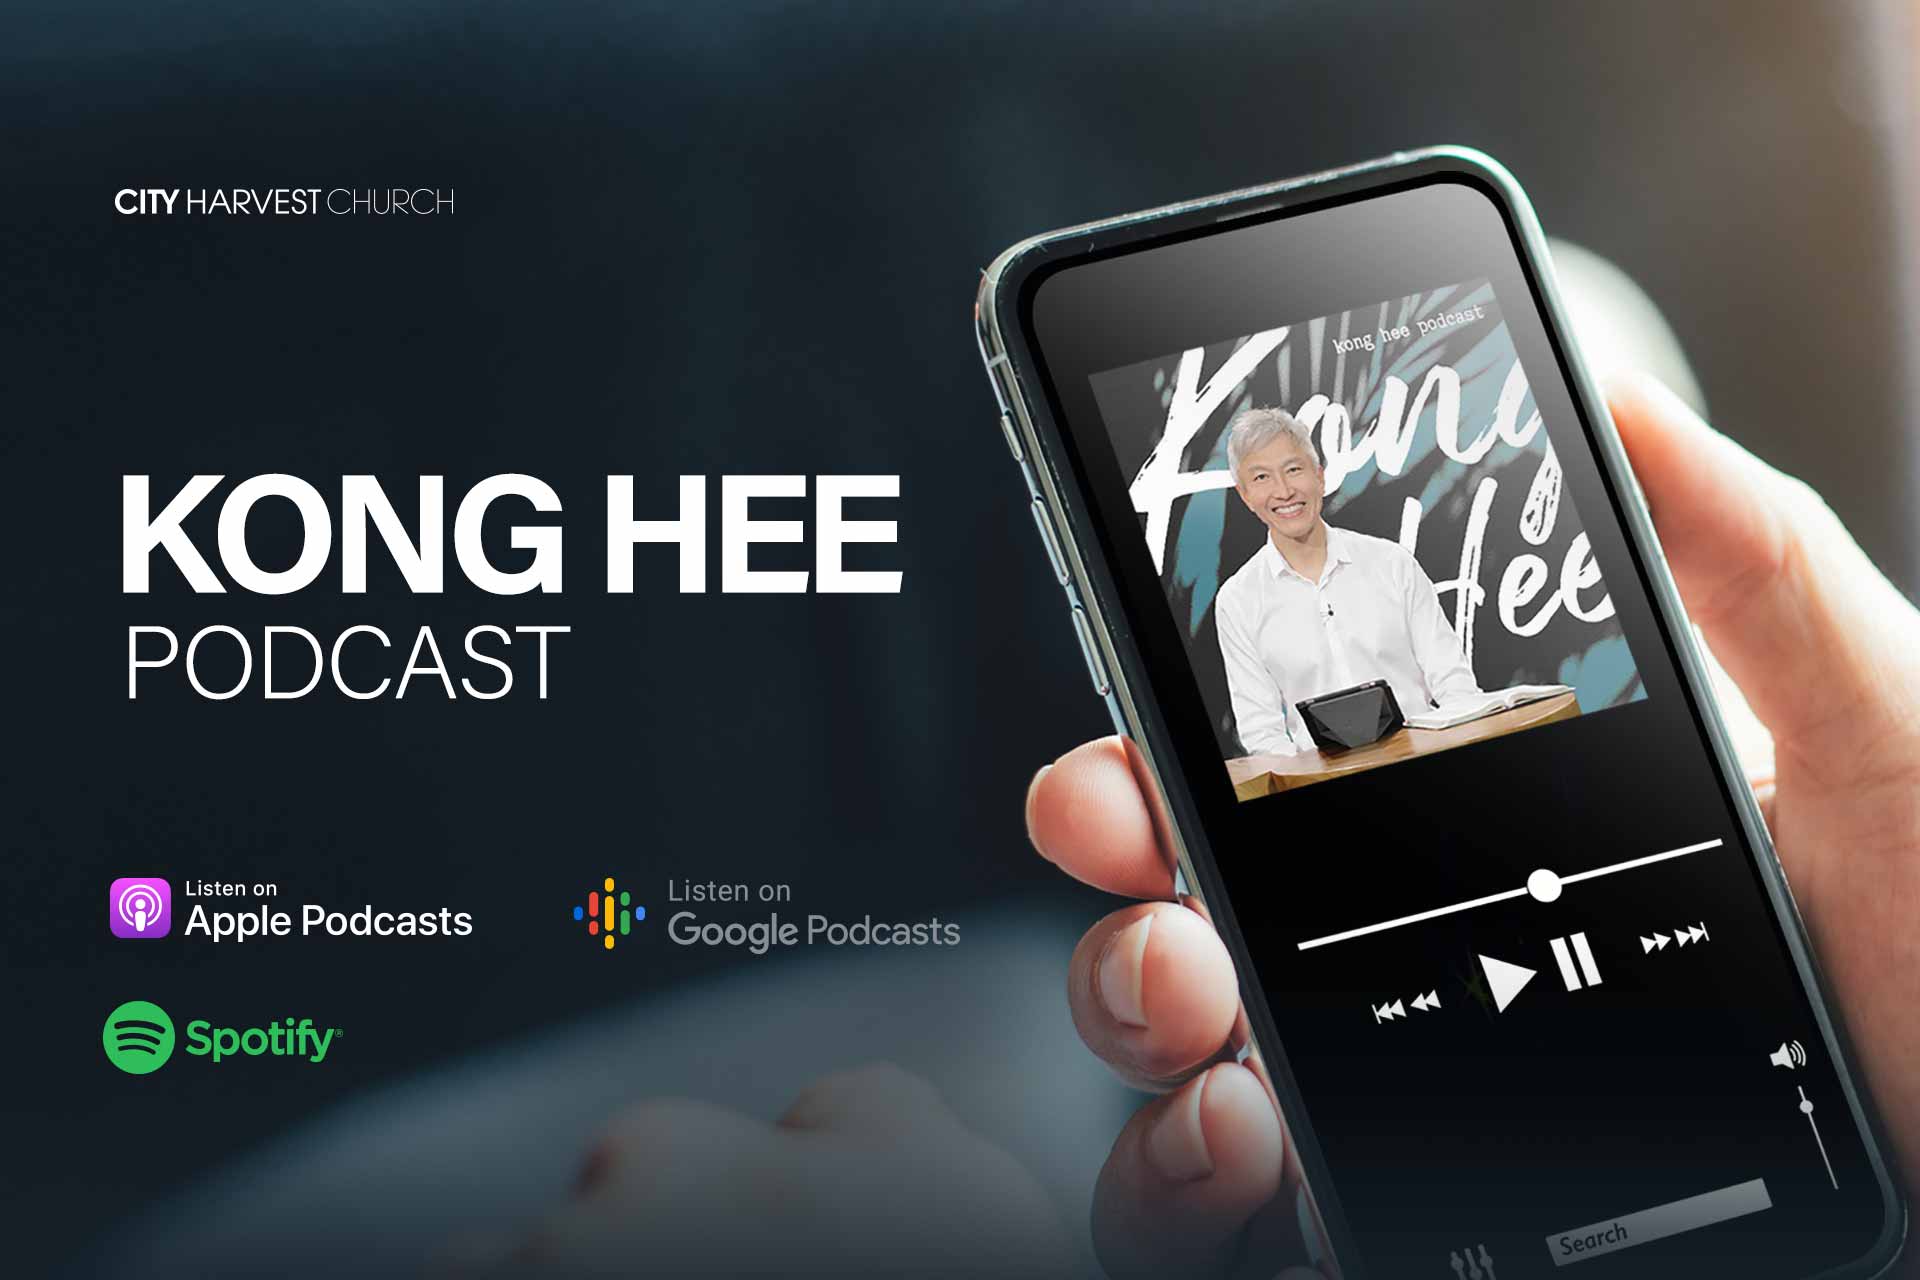 Kong Hee Podcast